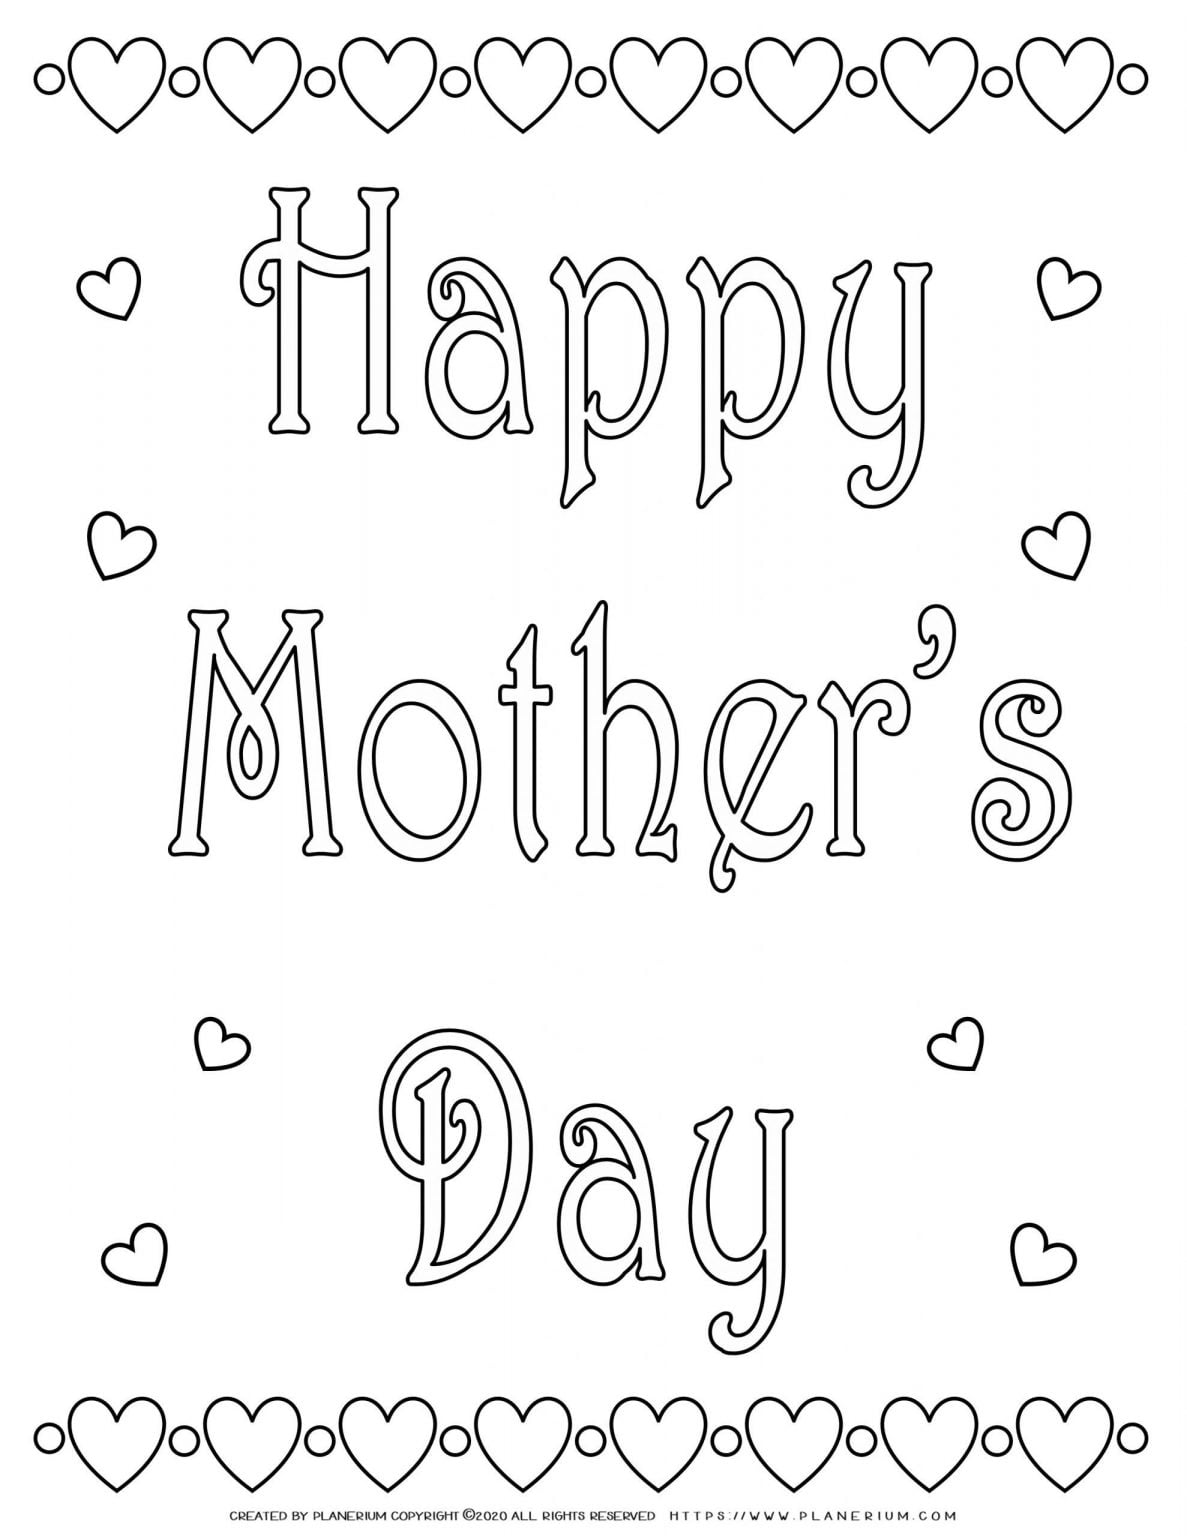 Happy Mother's day - Coloring page | Planerium